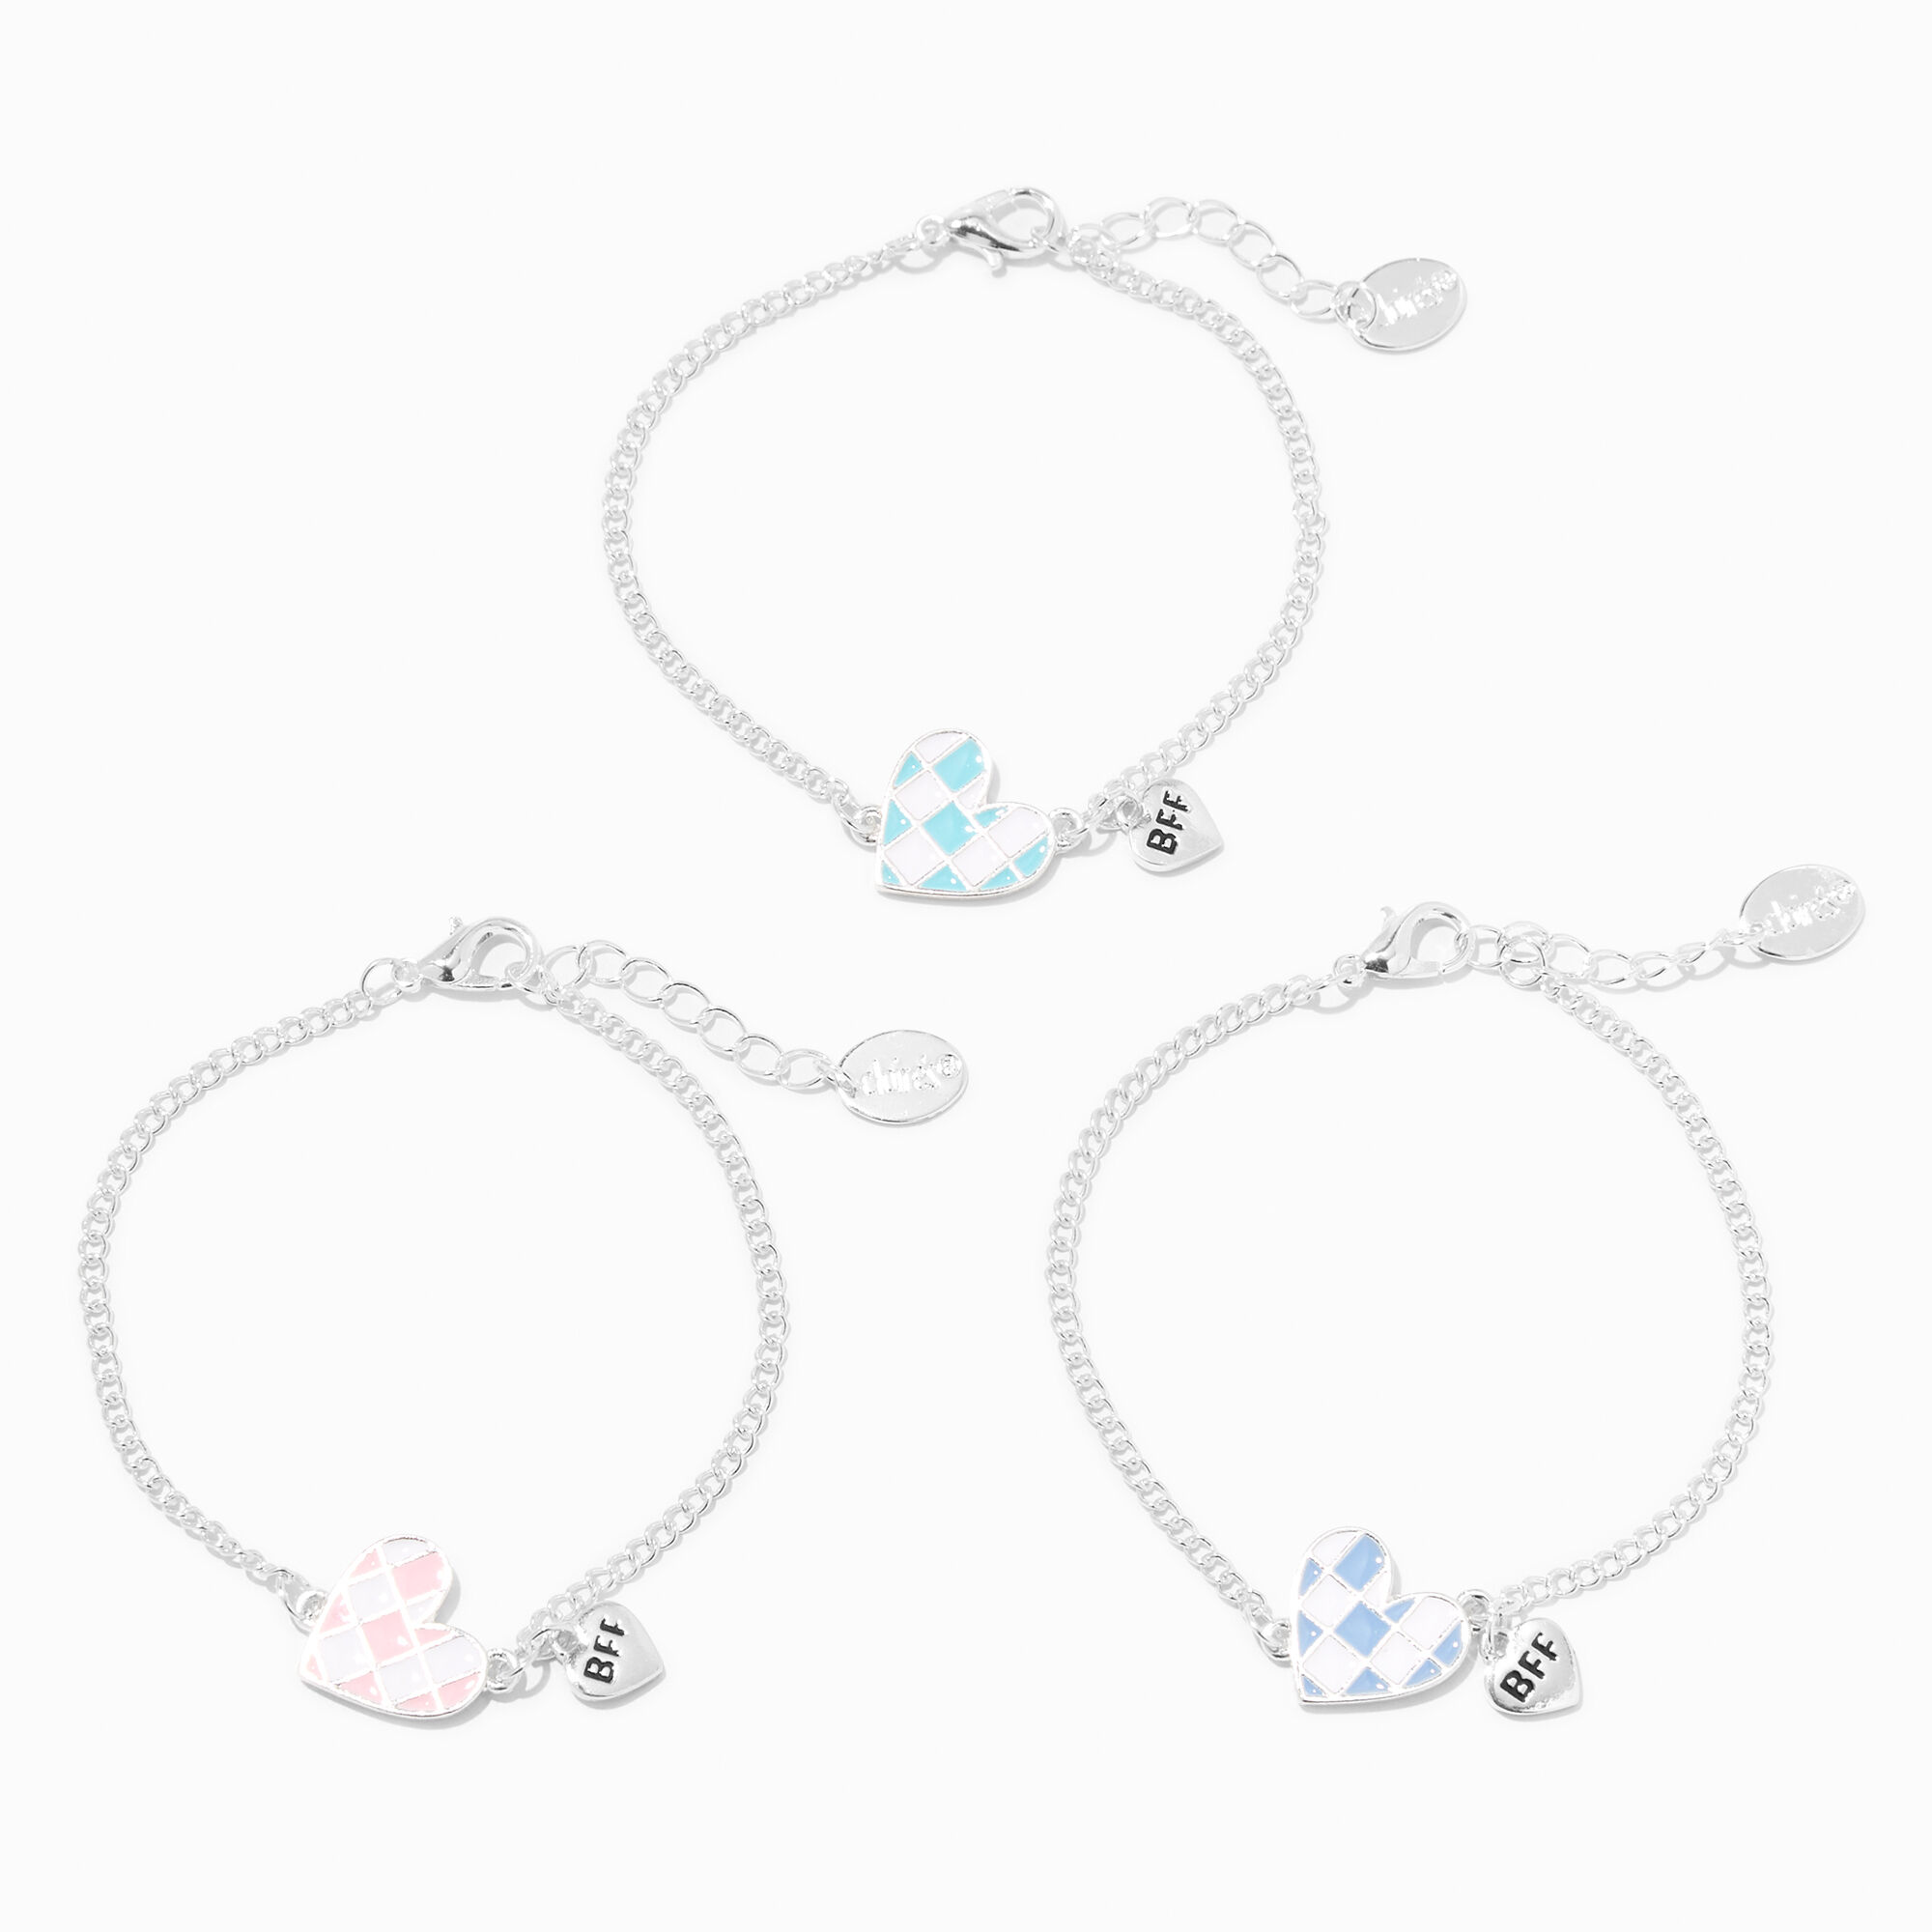 View Claires Best Friends Checkered Heart Chain Bracelets 3 Pack information